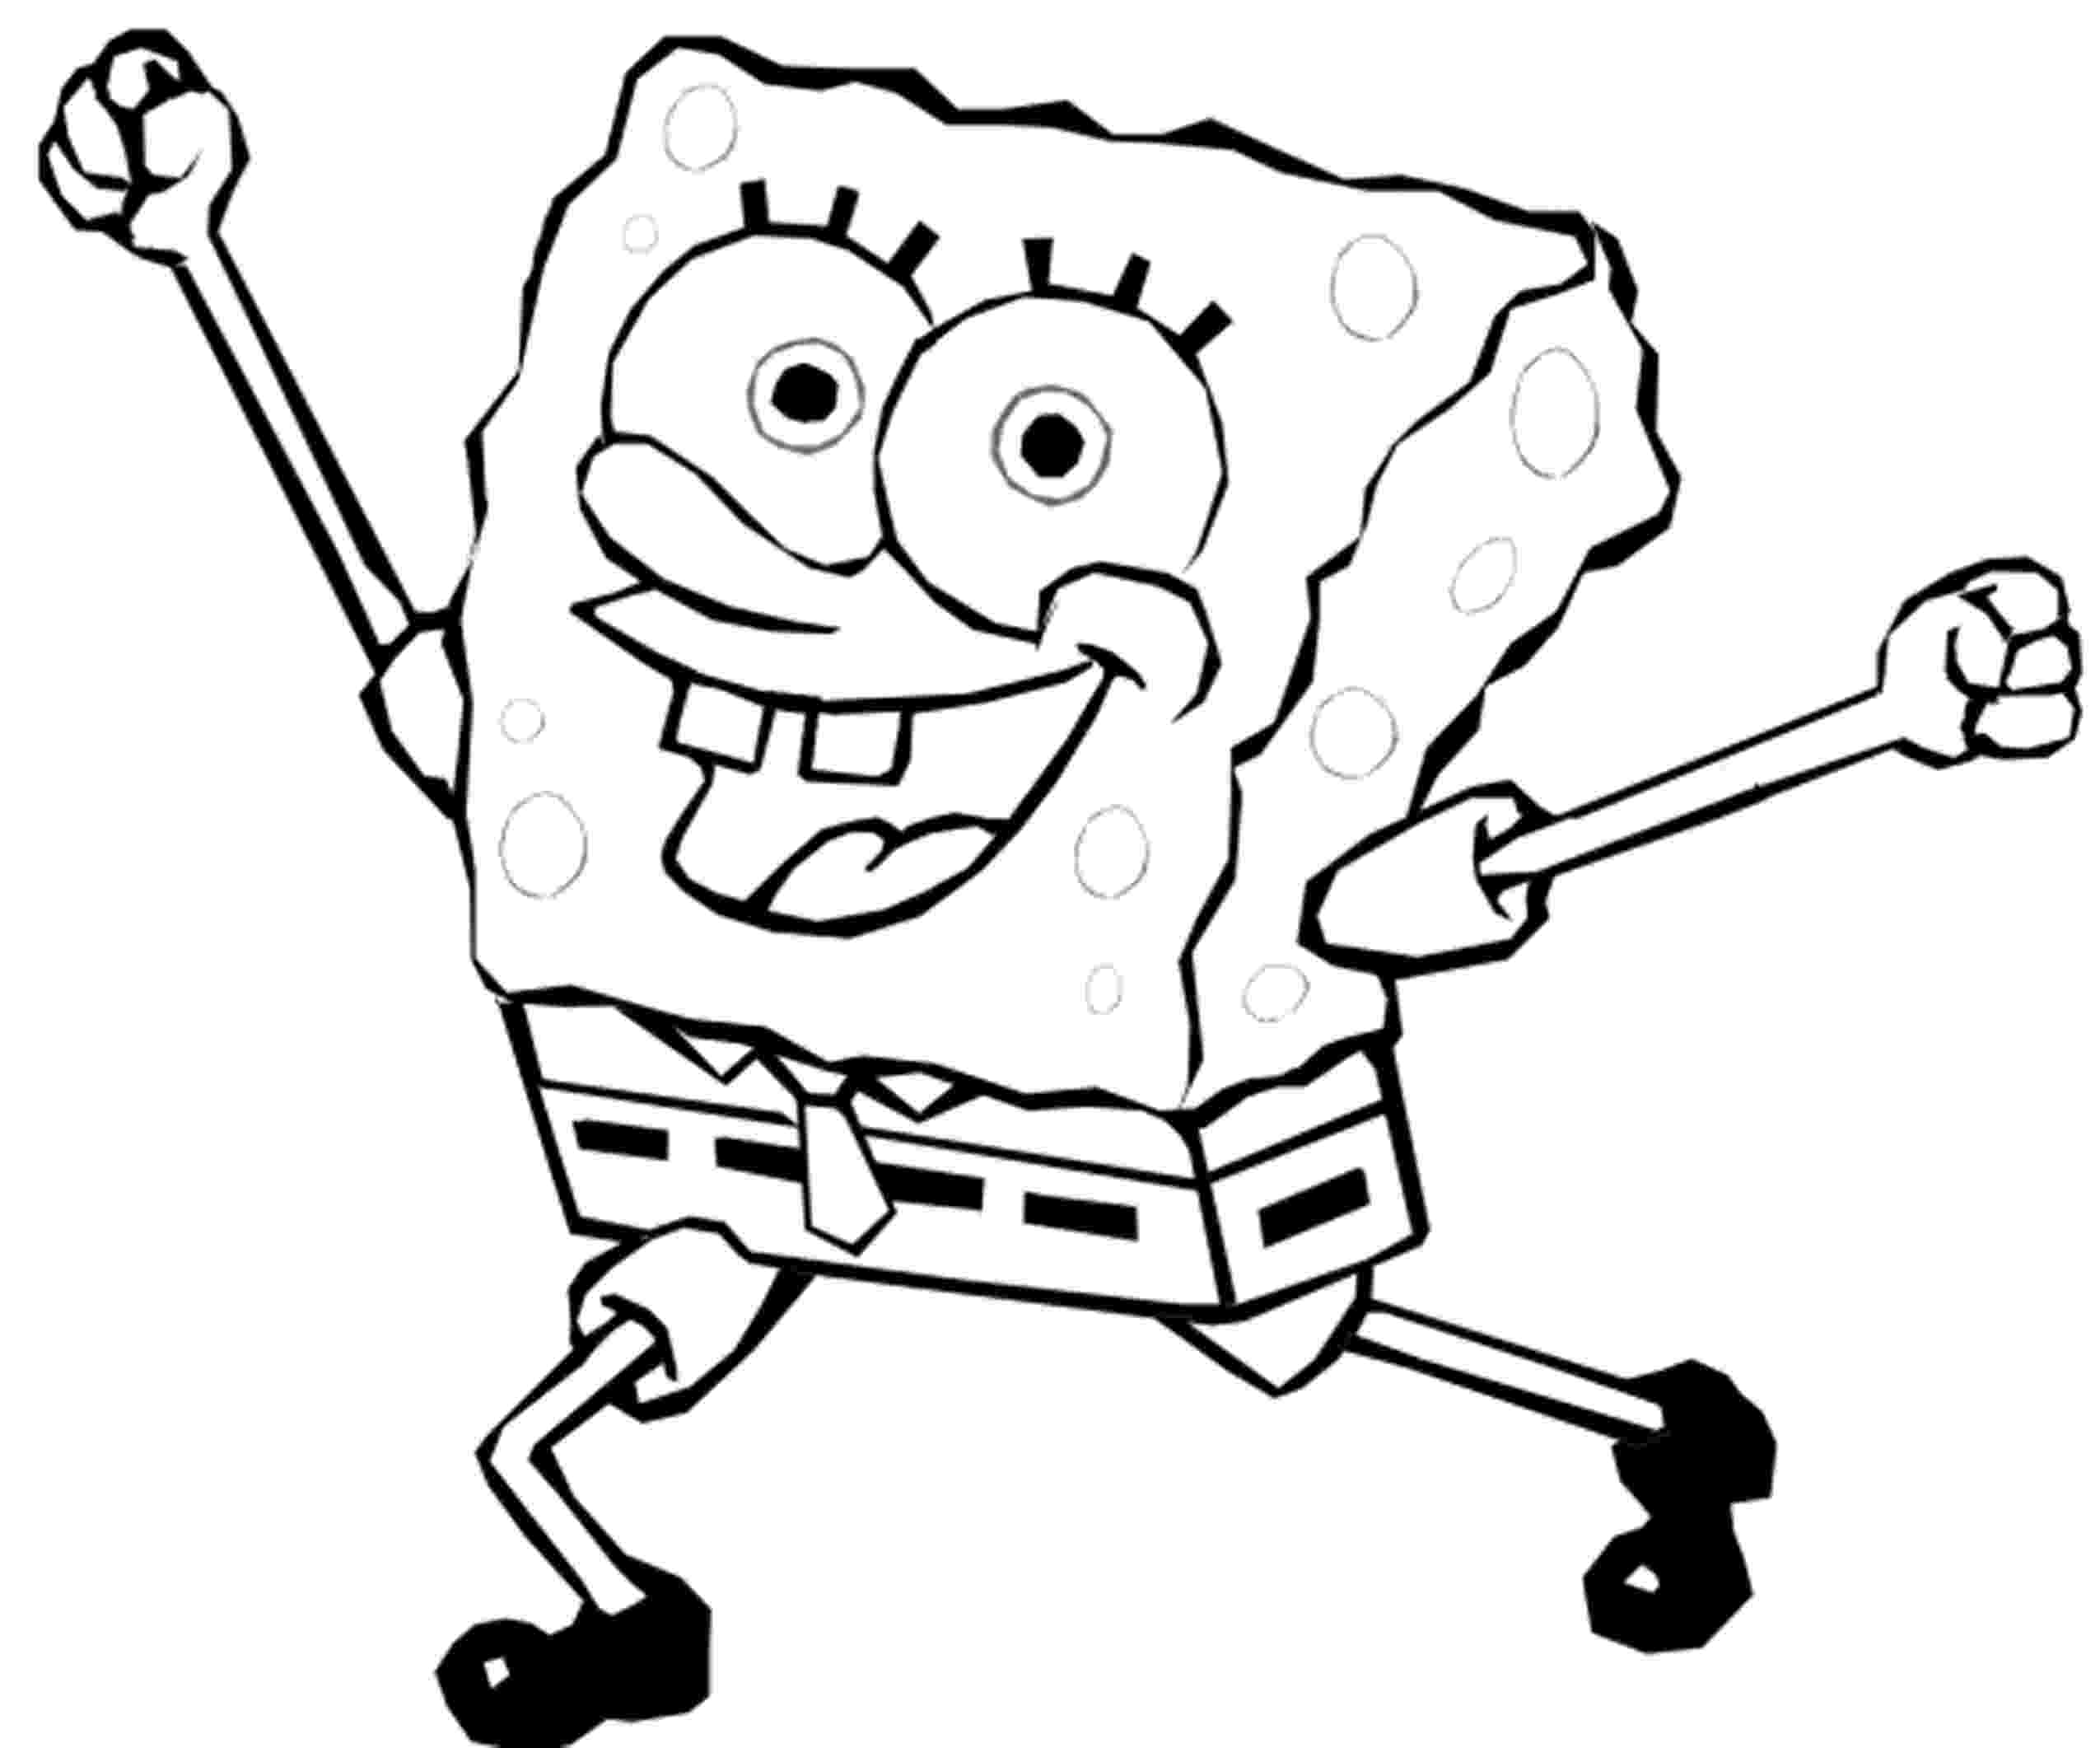 black and white pictures of spongebob squarepants spongebob best coloring pages minister coloring and of black pictures squarepants spongebob white 